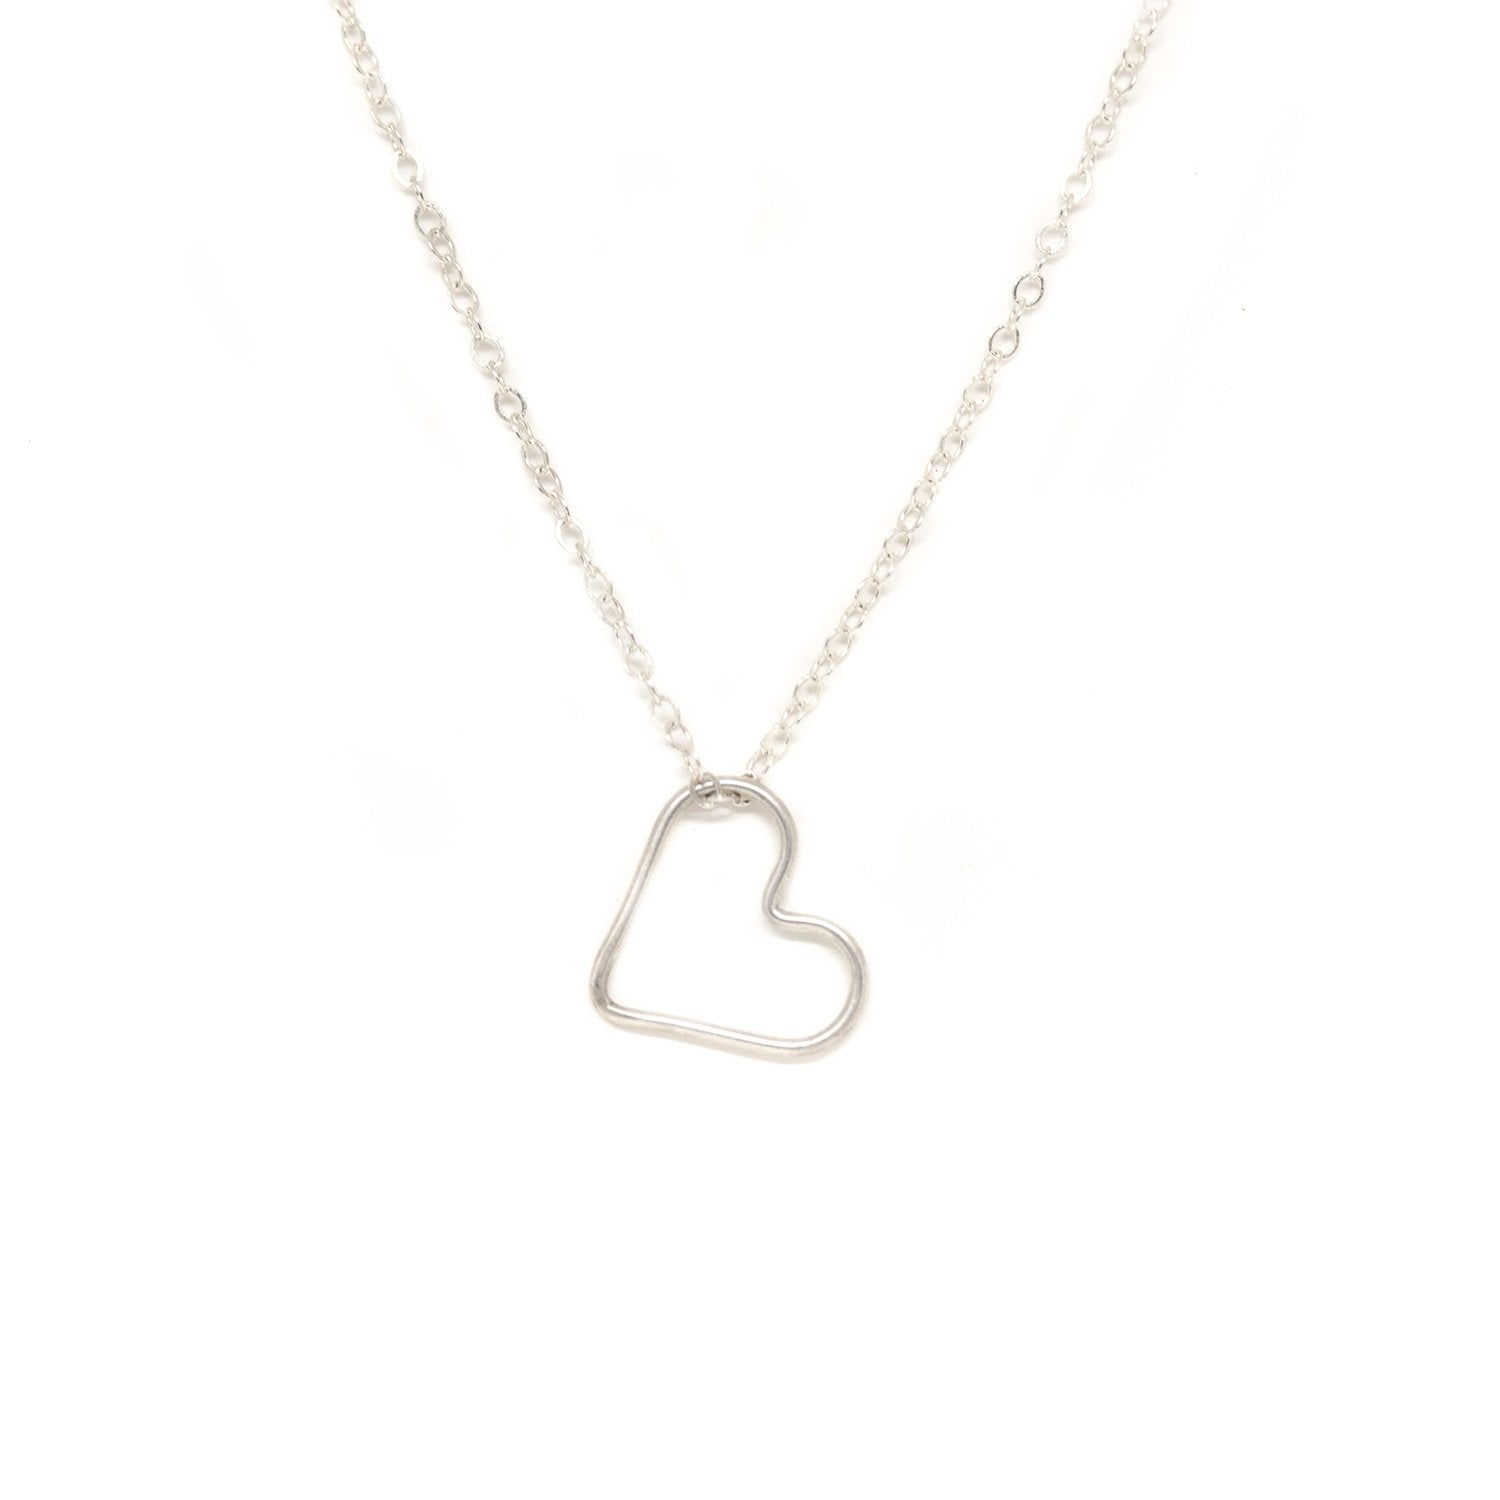 Silver Floating Heart Necklace 